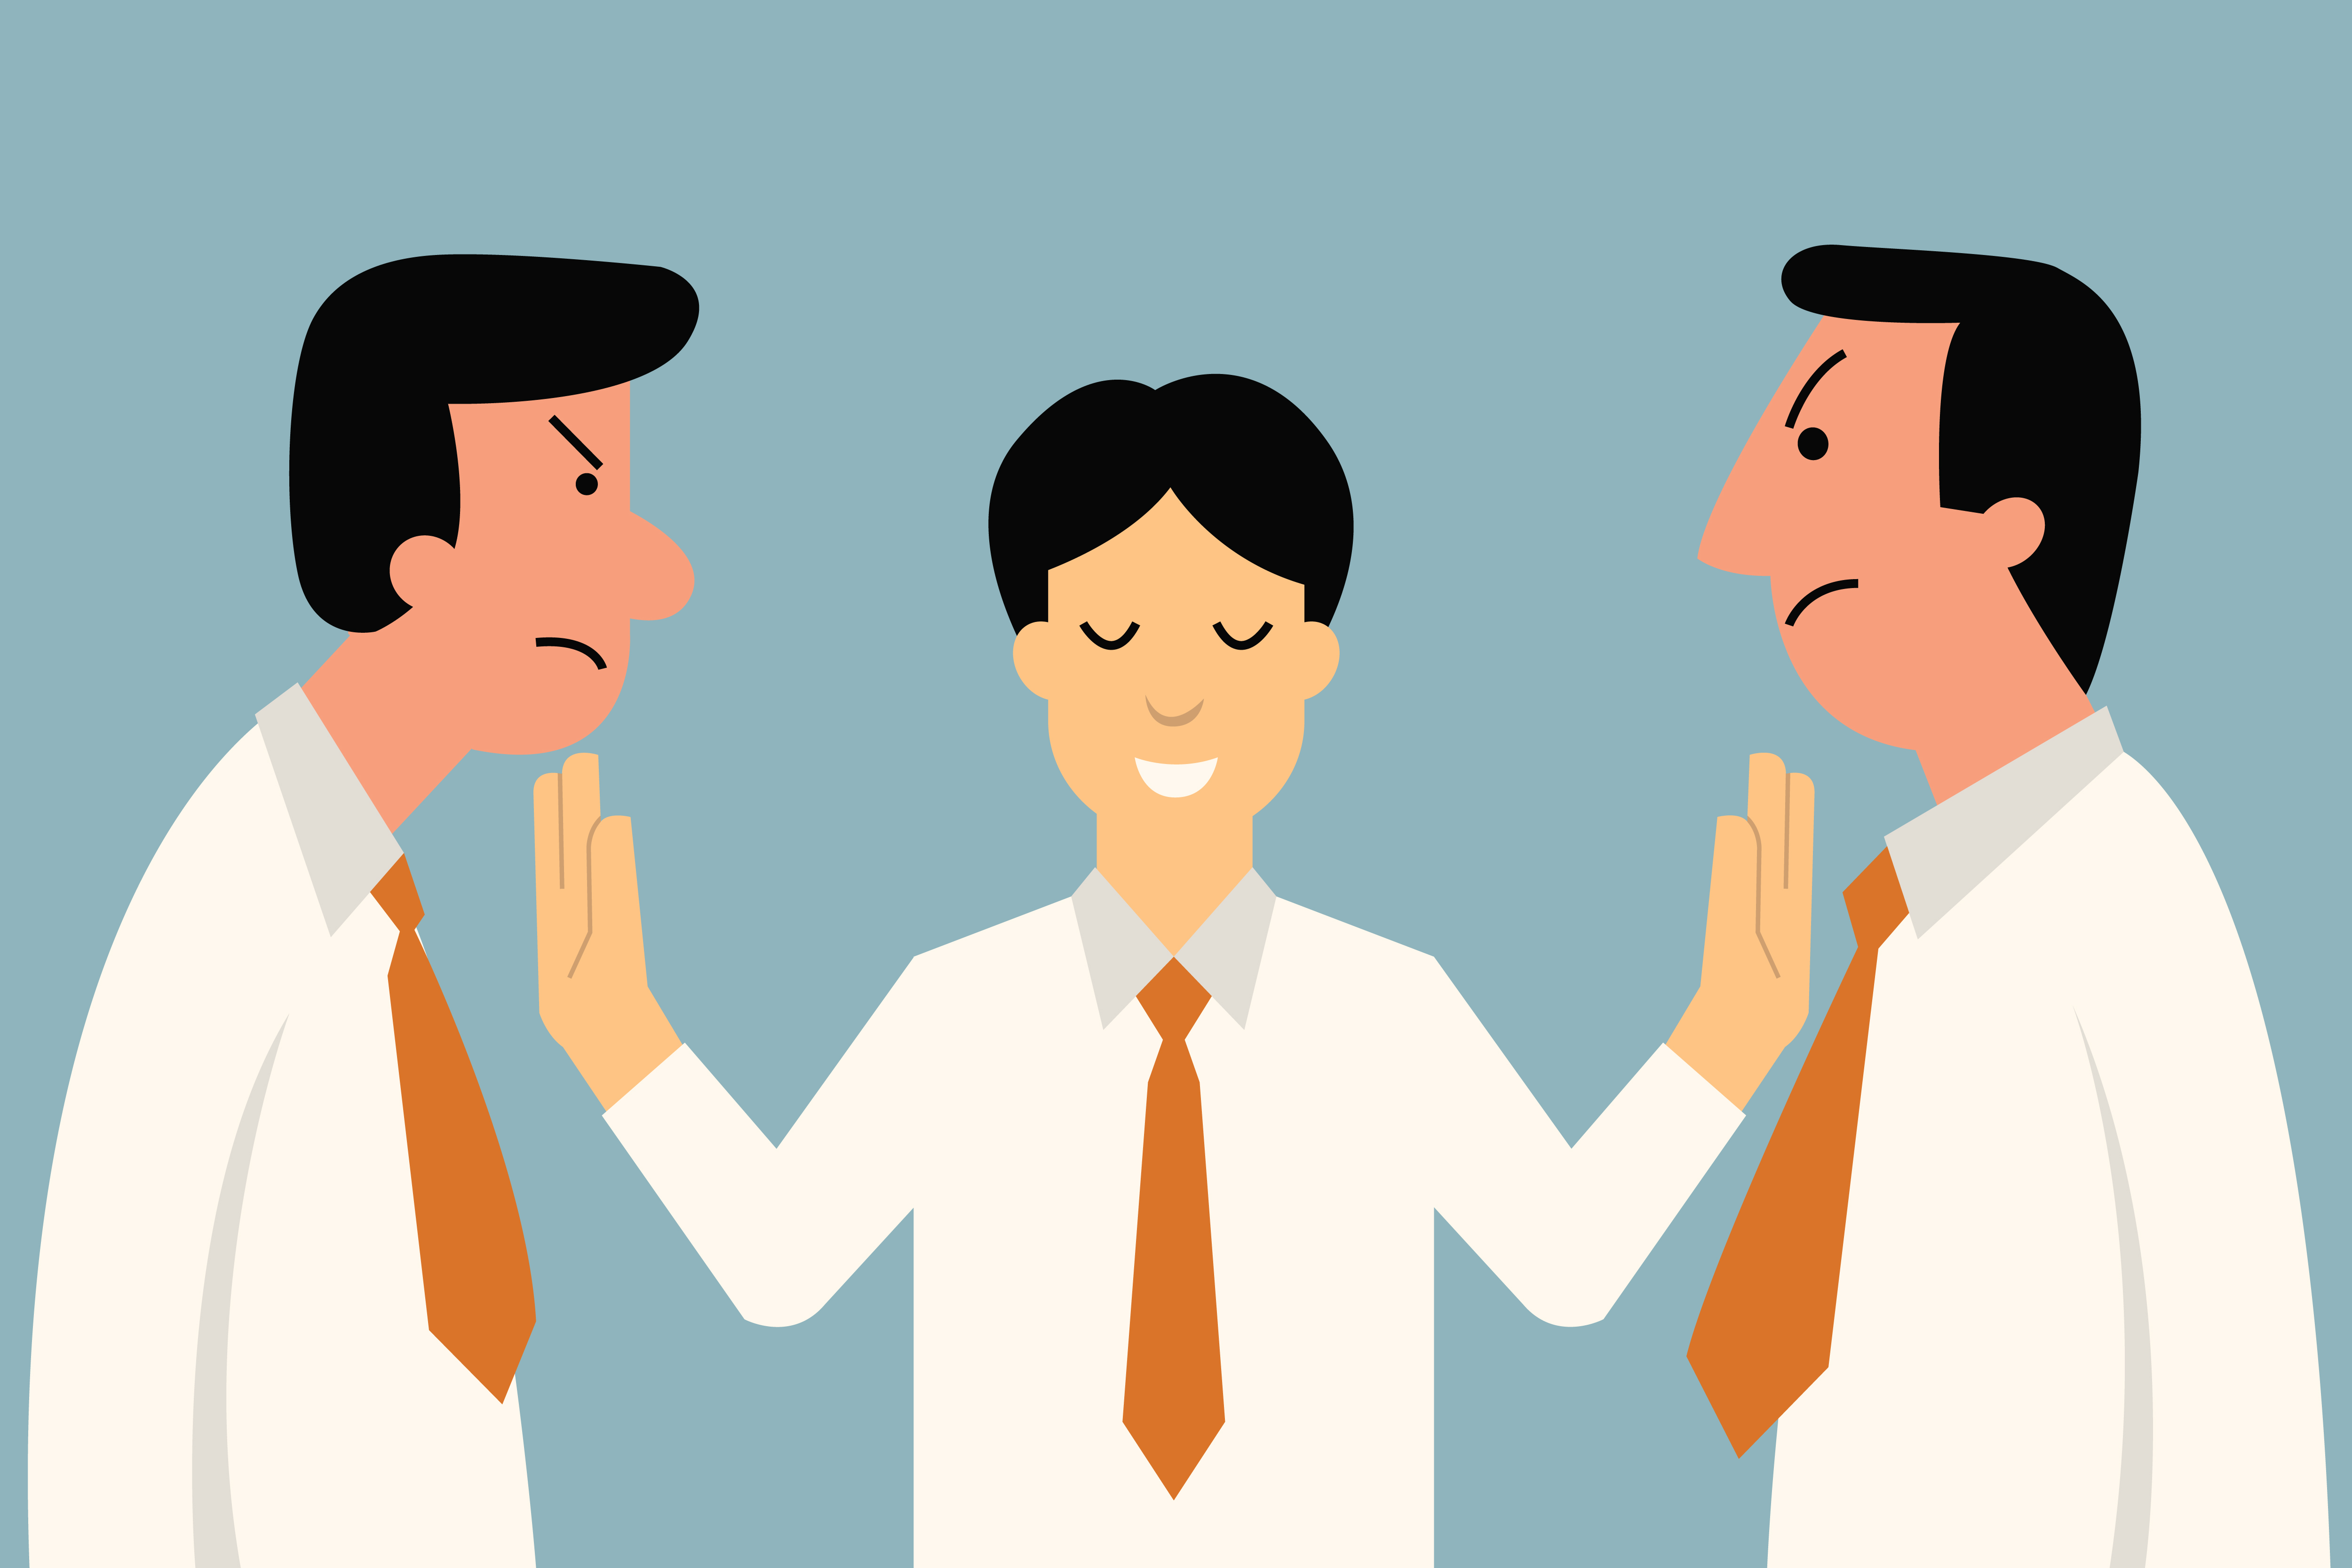 Learning to be a Mediator to resolve conflicts